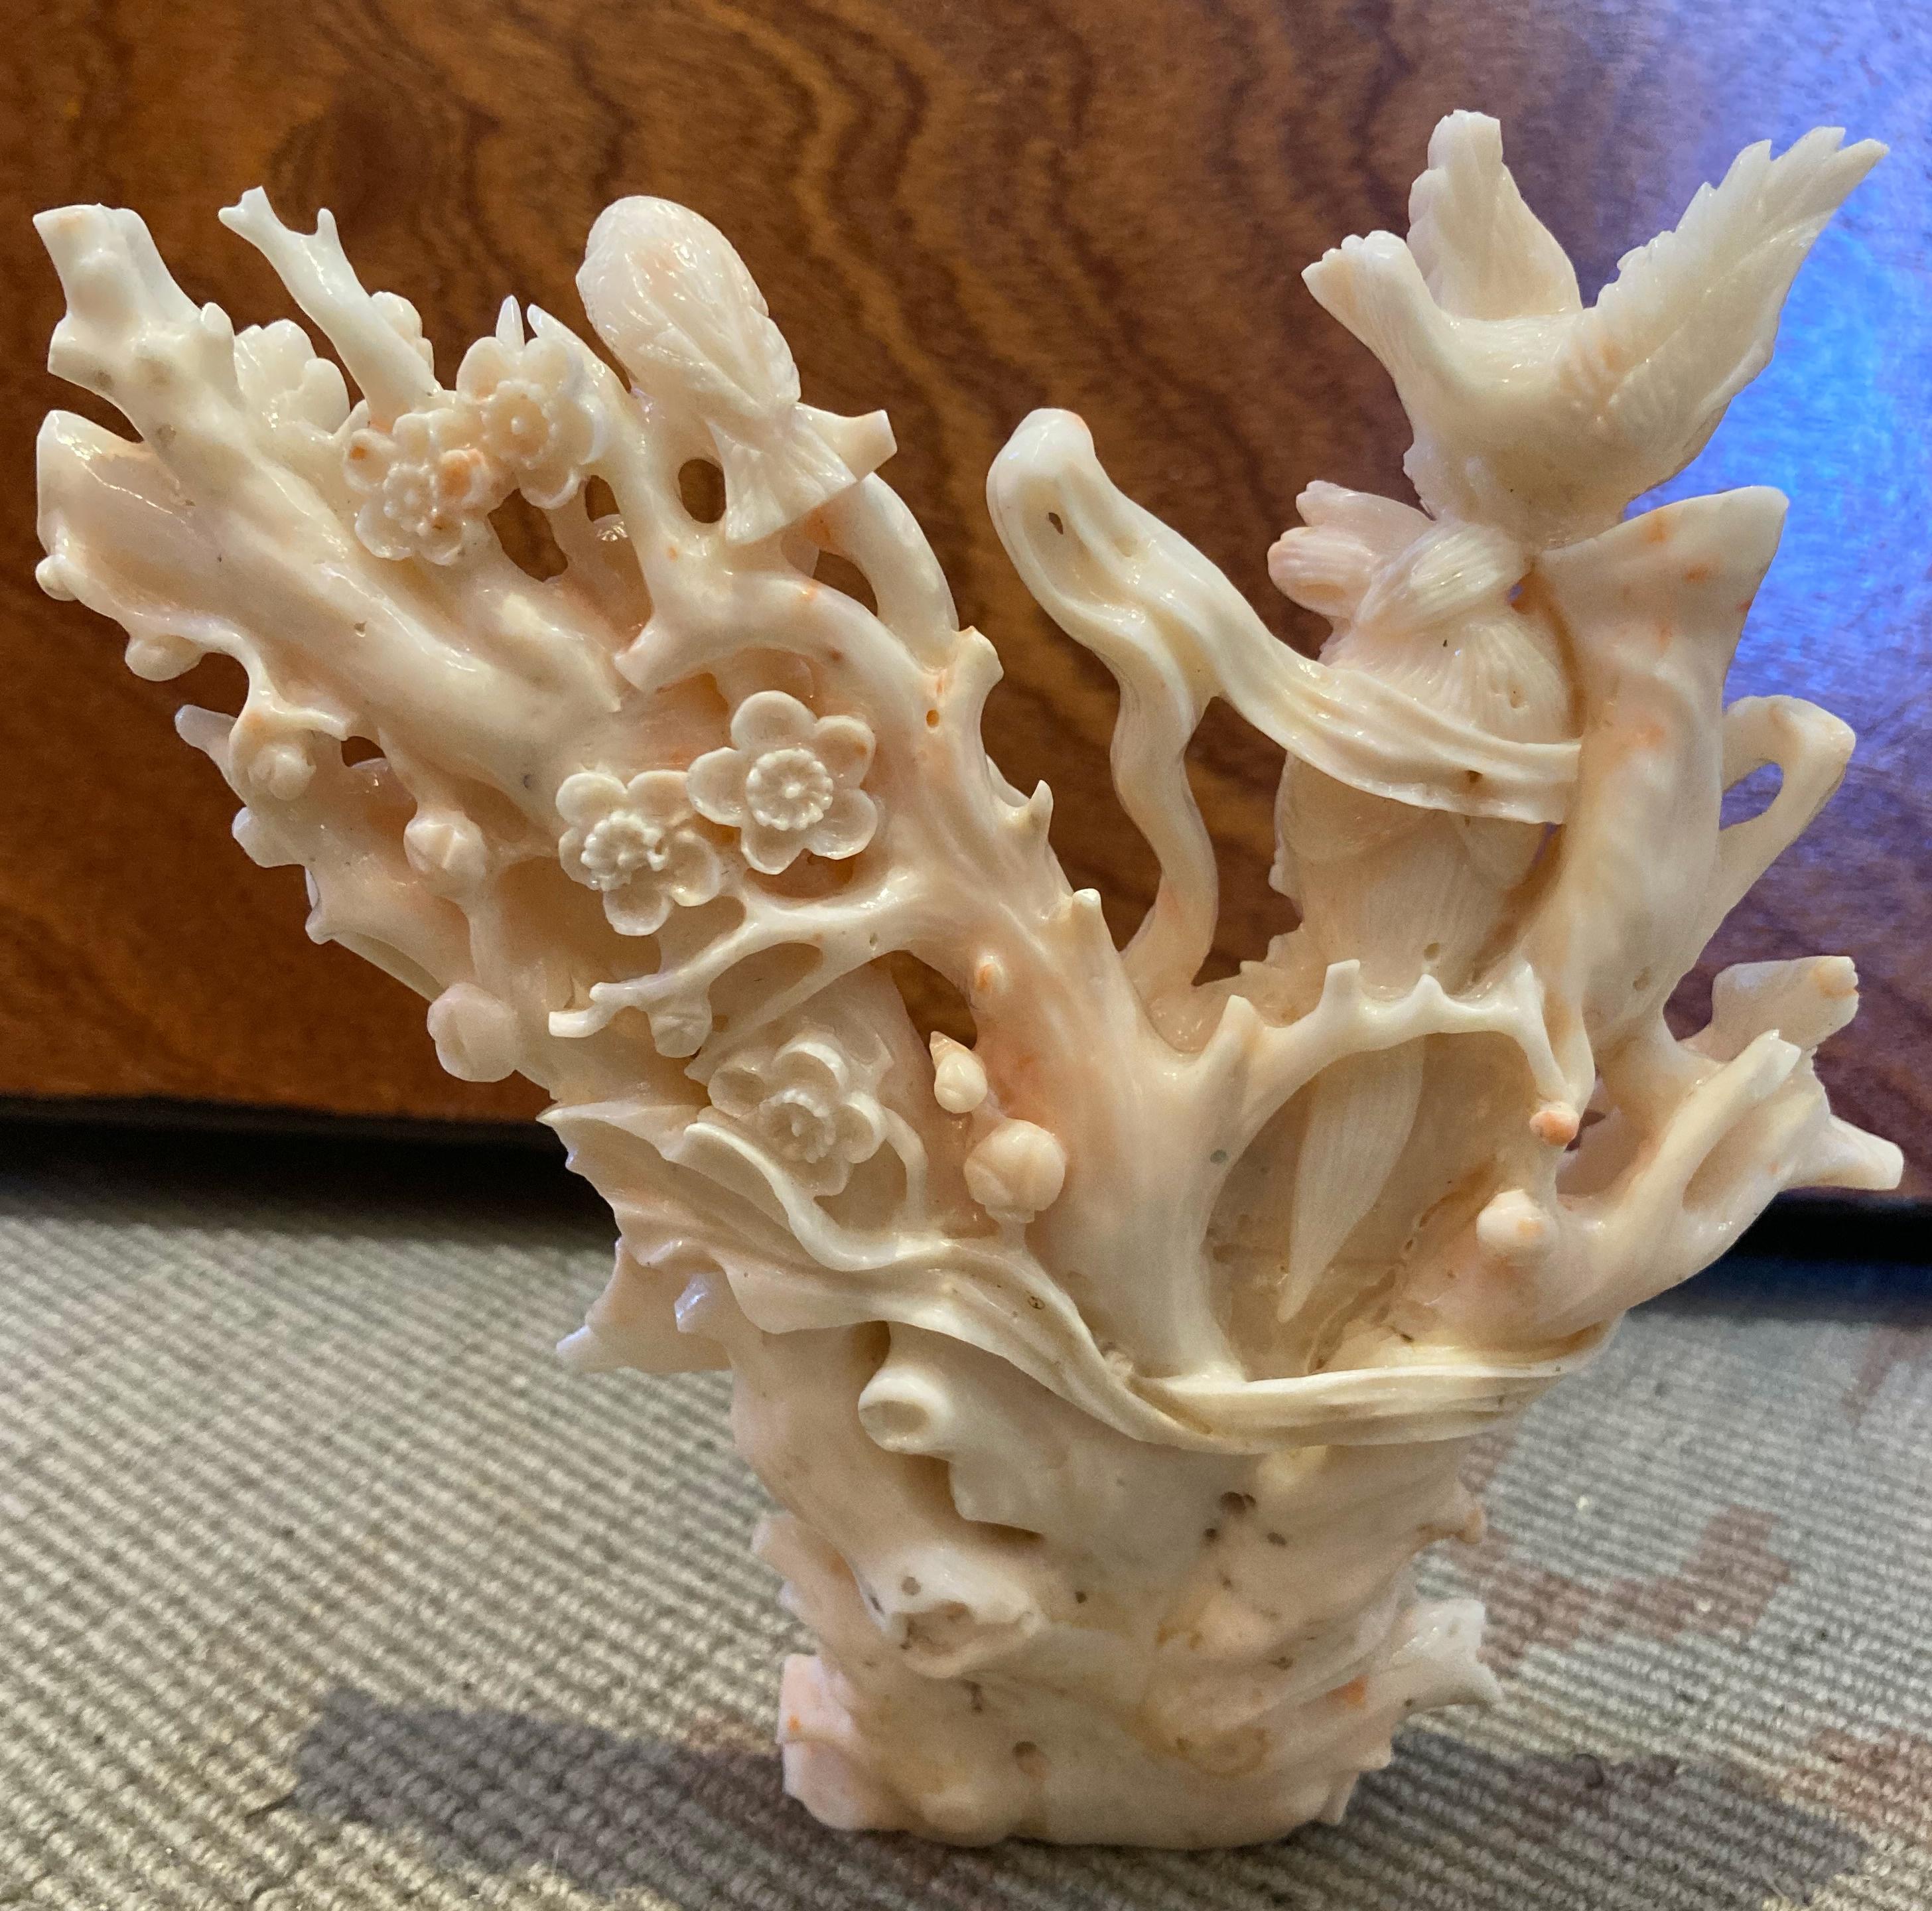 A fine carving of Kwan Yin (Guanyin) from a single branch of exceedingly rare angel skin coral. Kwan Yin is a Chinese Boddhisatva associated with compassion. From Wikipedia: 